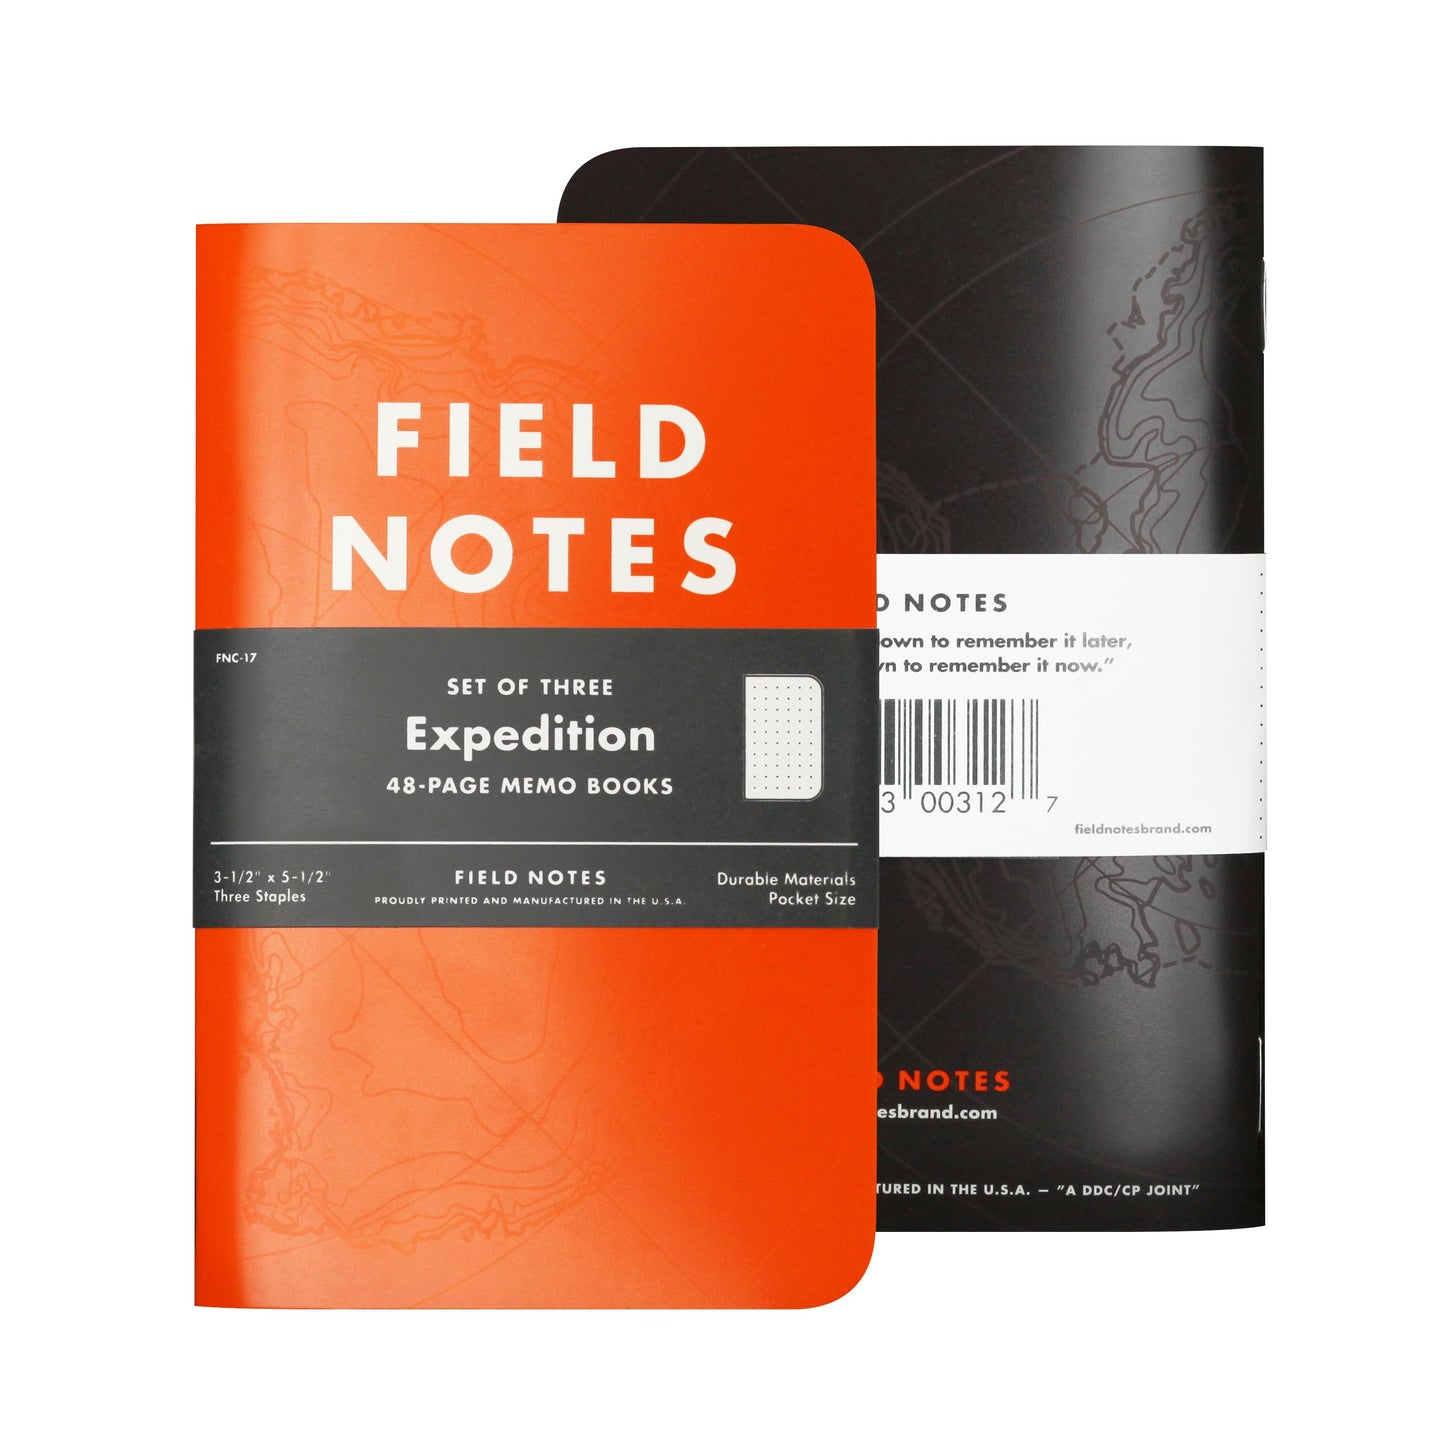 Field Notes Expedition Edition 3-Pack